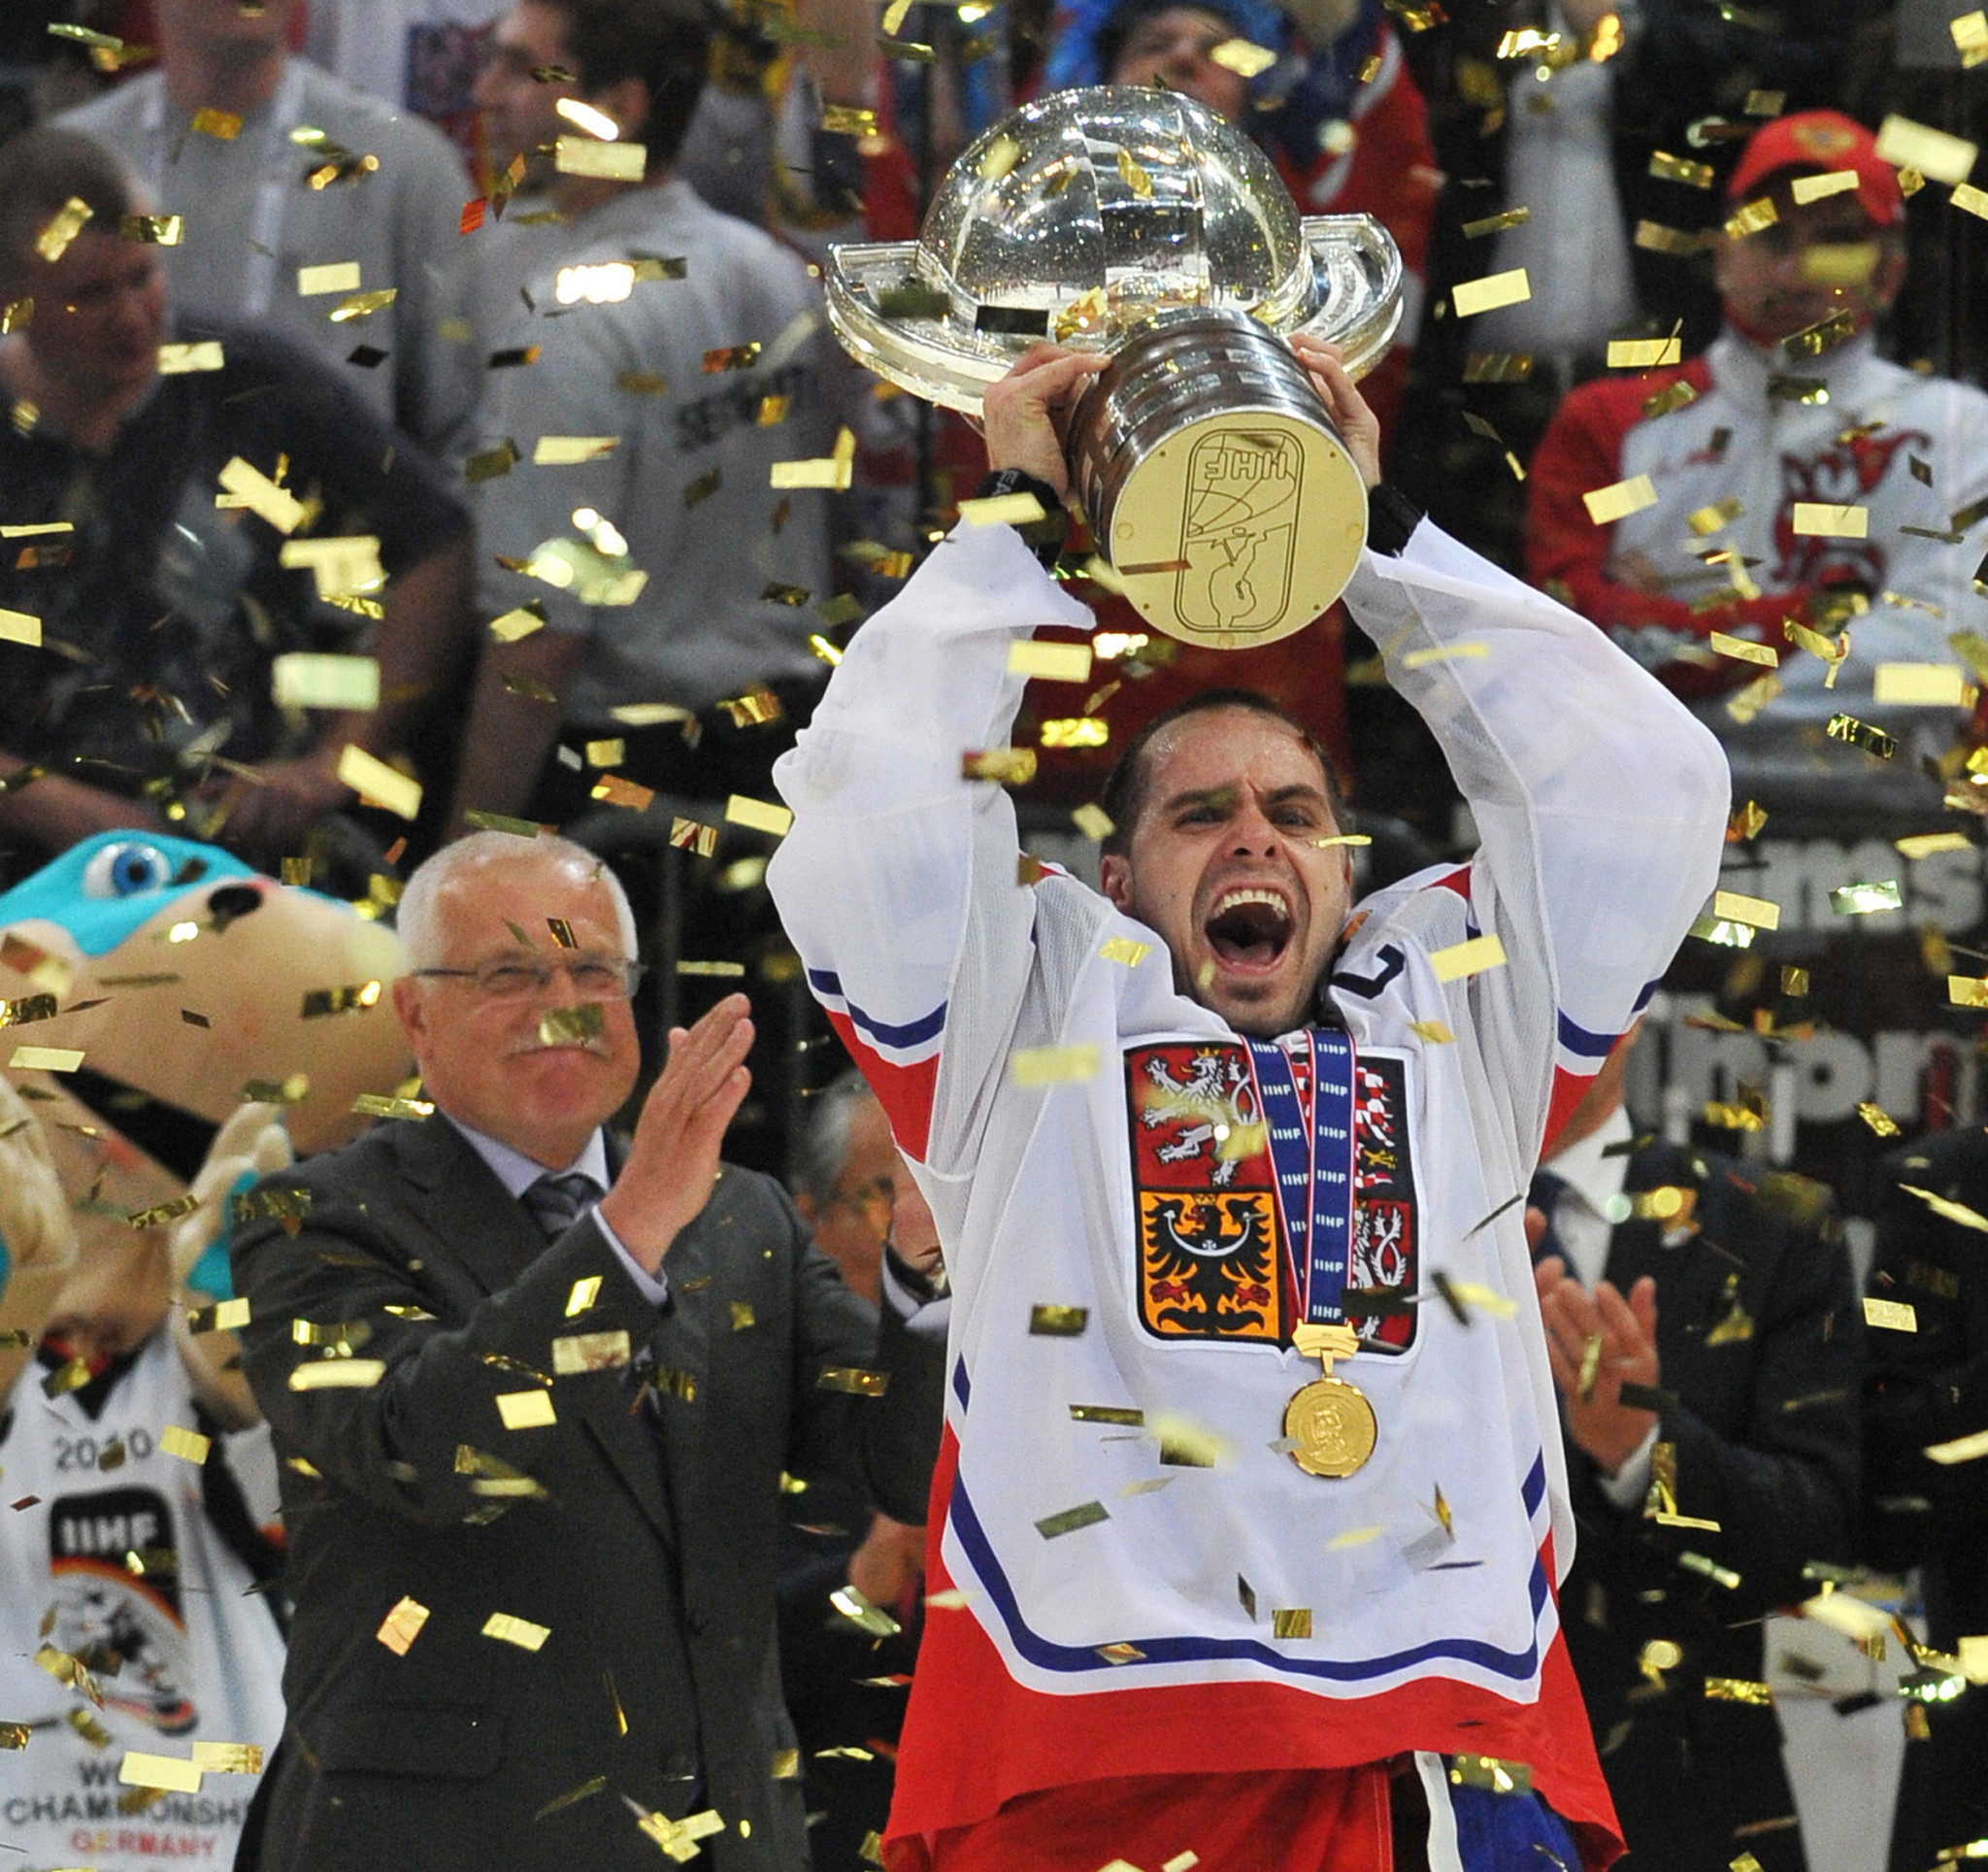 Tomáš Rolinek captained the Czech Republic to a world title in 2010 ©Getty Images